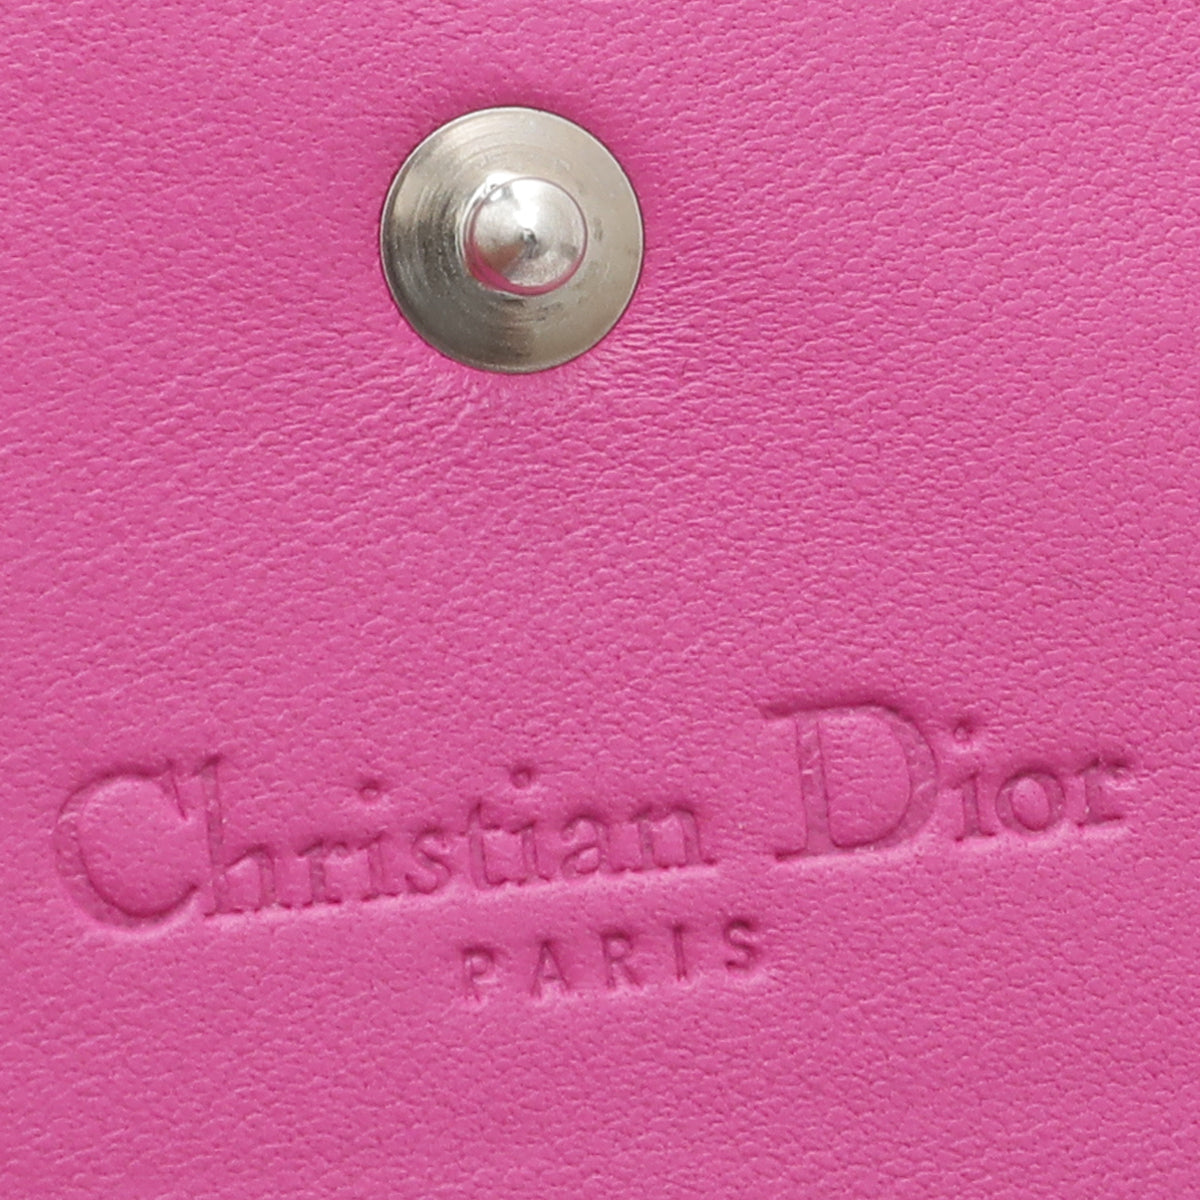 Christian Dior Pink Lady Dior Python Rendezvous Wallet On Chain